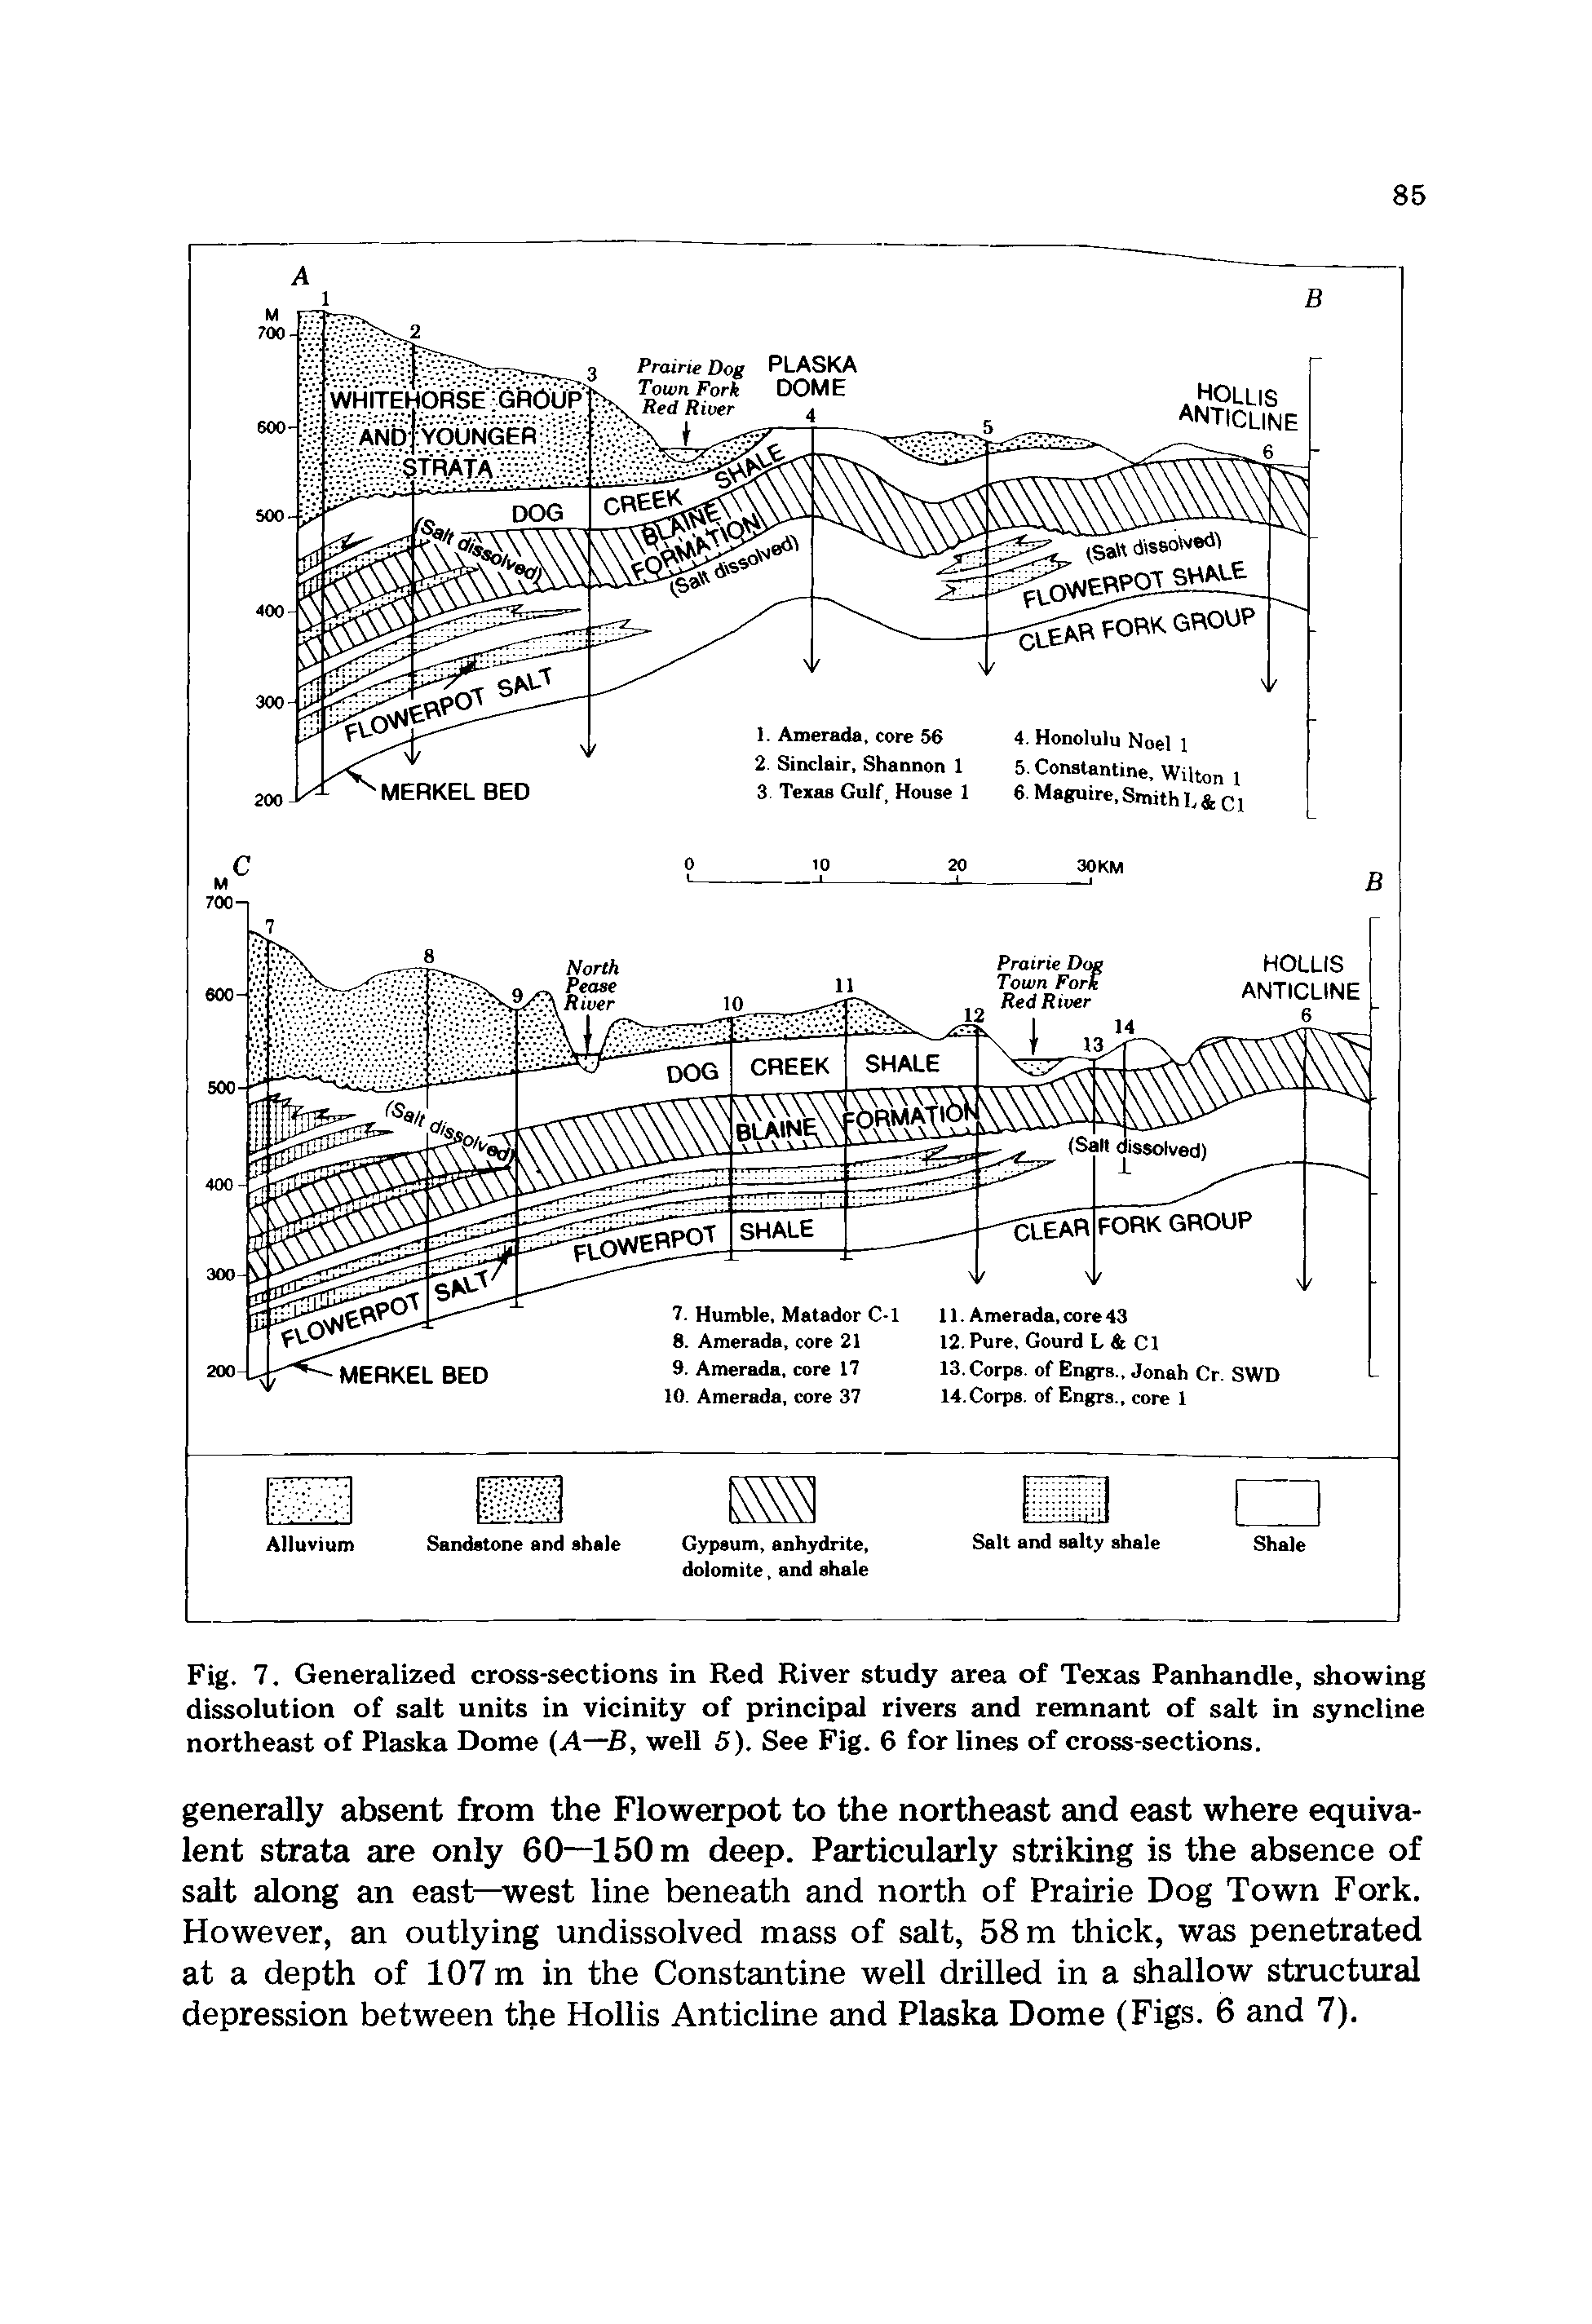 Fig. 7. Generalized cross-sections in Red River study area of Texas Panhandle, showing dissolution of salt units in vicinity of principal rivers and remnant of salt in syncline northeast of Plaska Dome (A—B, well 5). See Fig. 6 for lines of cross-sections.